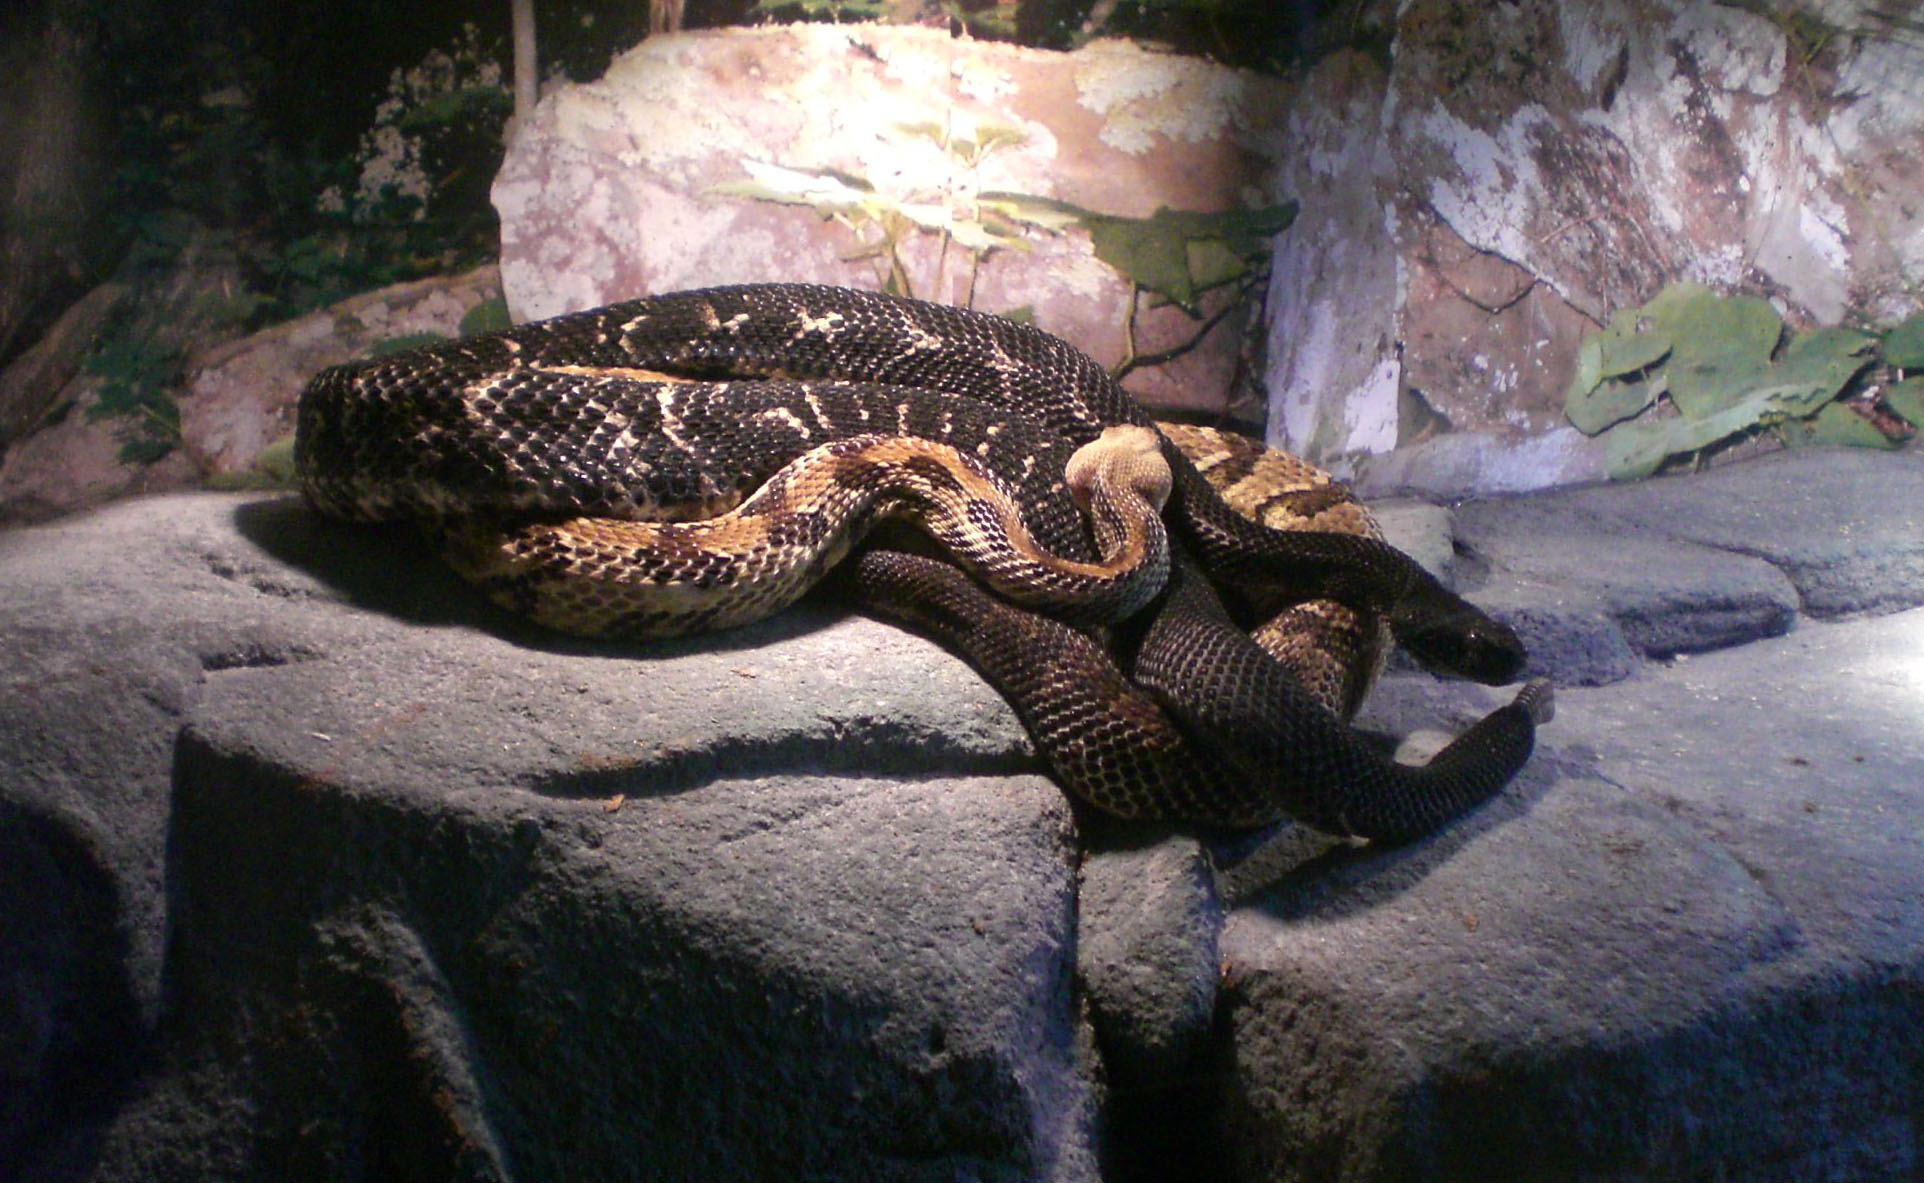 a snake is curled up on rocks inside an exhibit